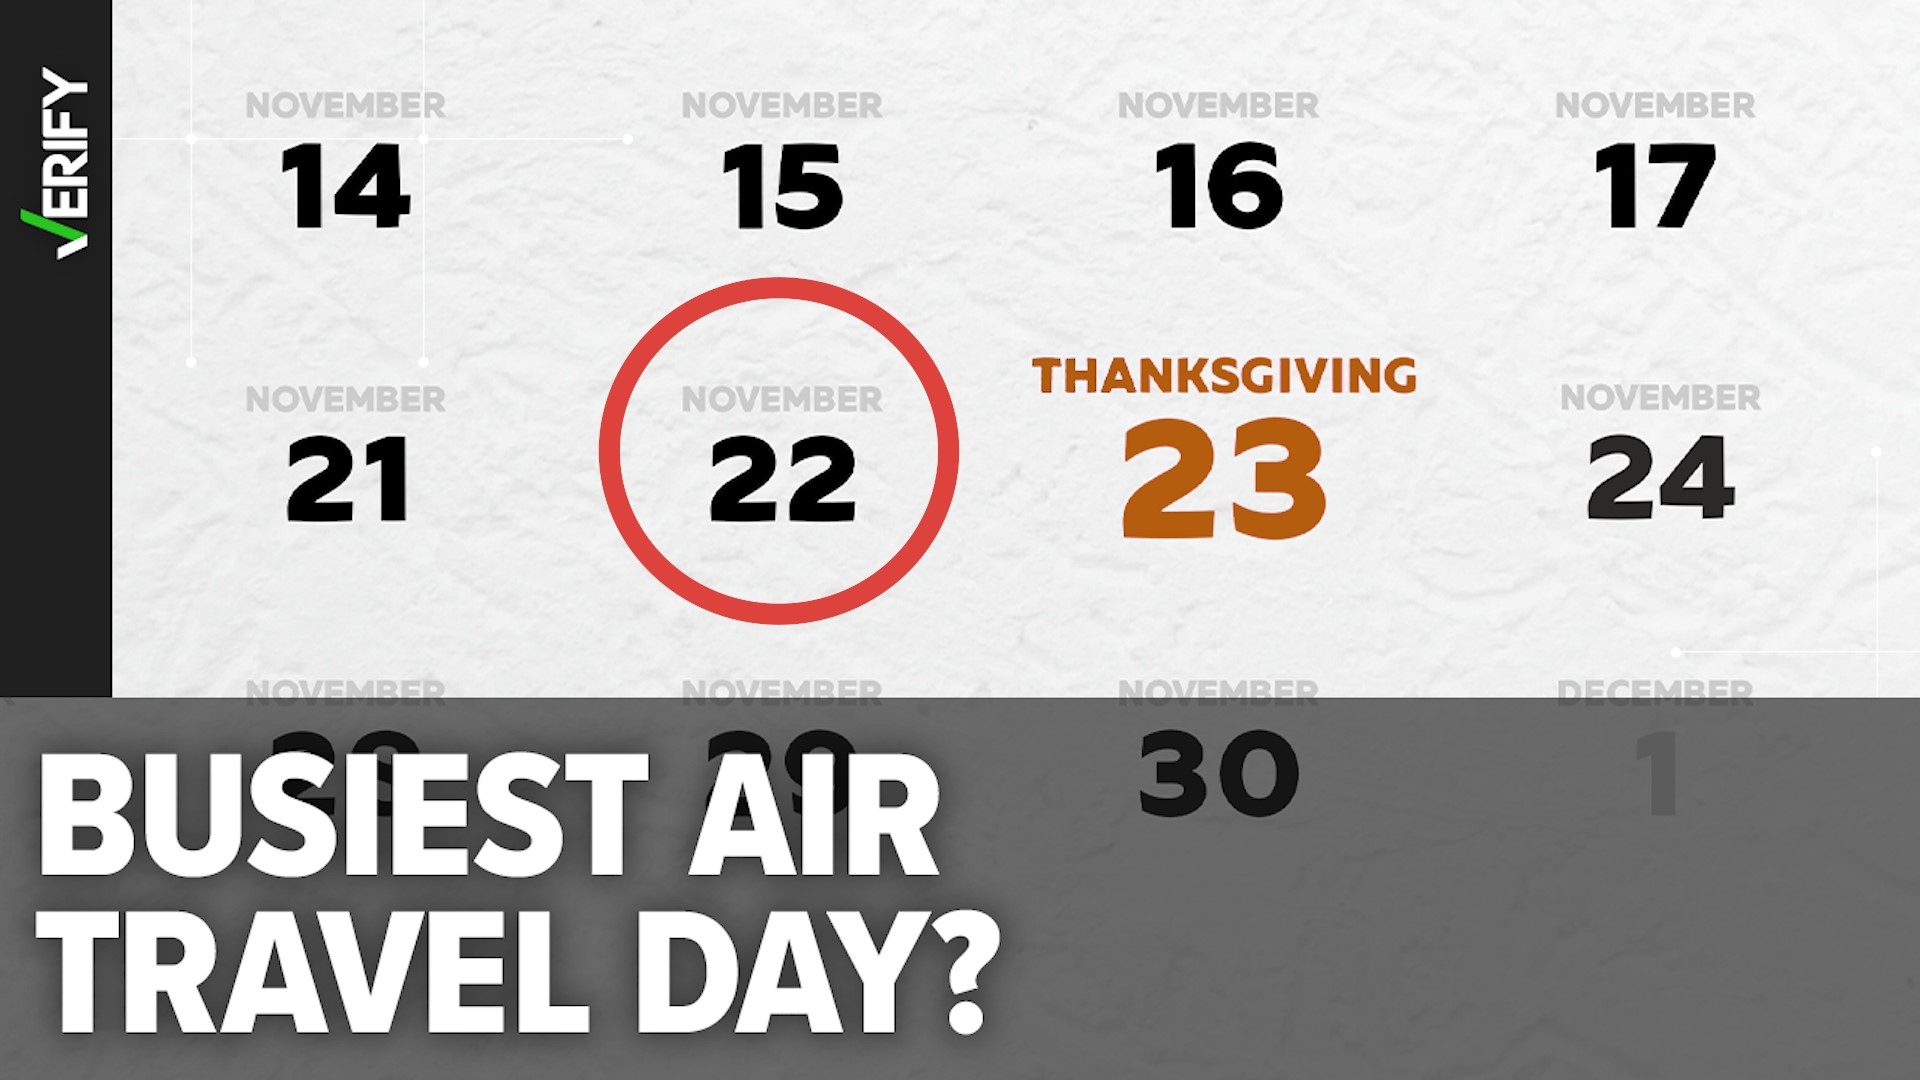 The Wednesday before Thanksgiving is not the busiest air travel day of the year. For air travel, that day isn’t nearly as busy as the Sunday that follows the holiday